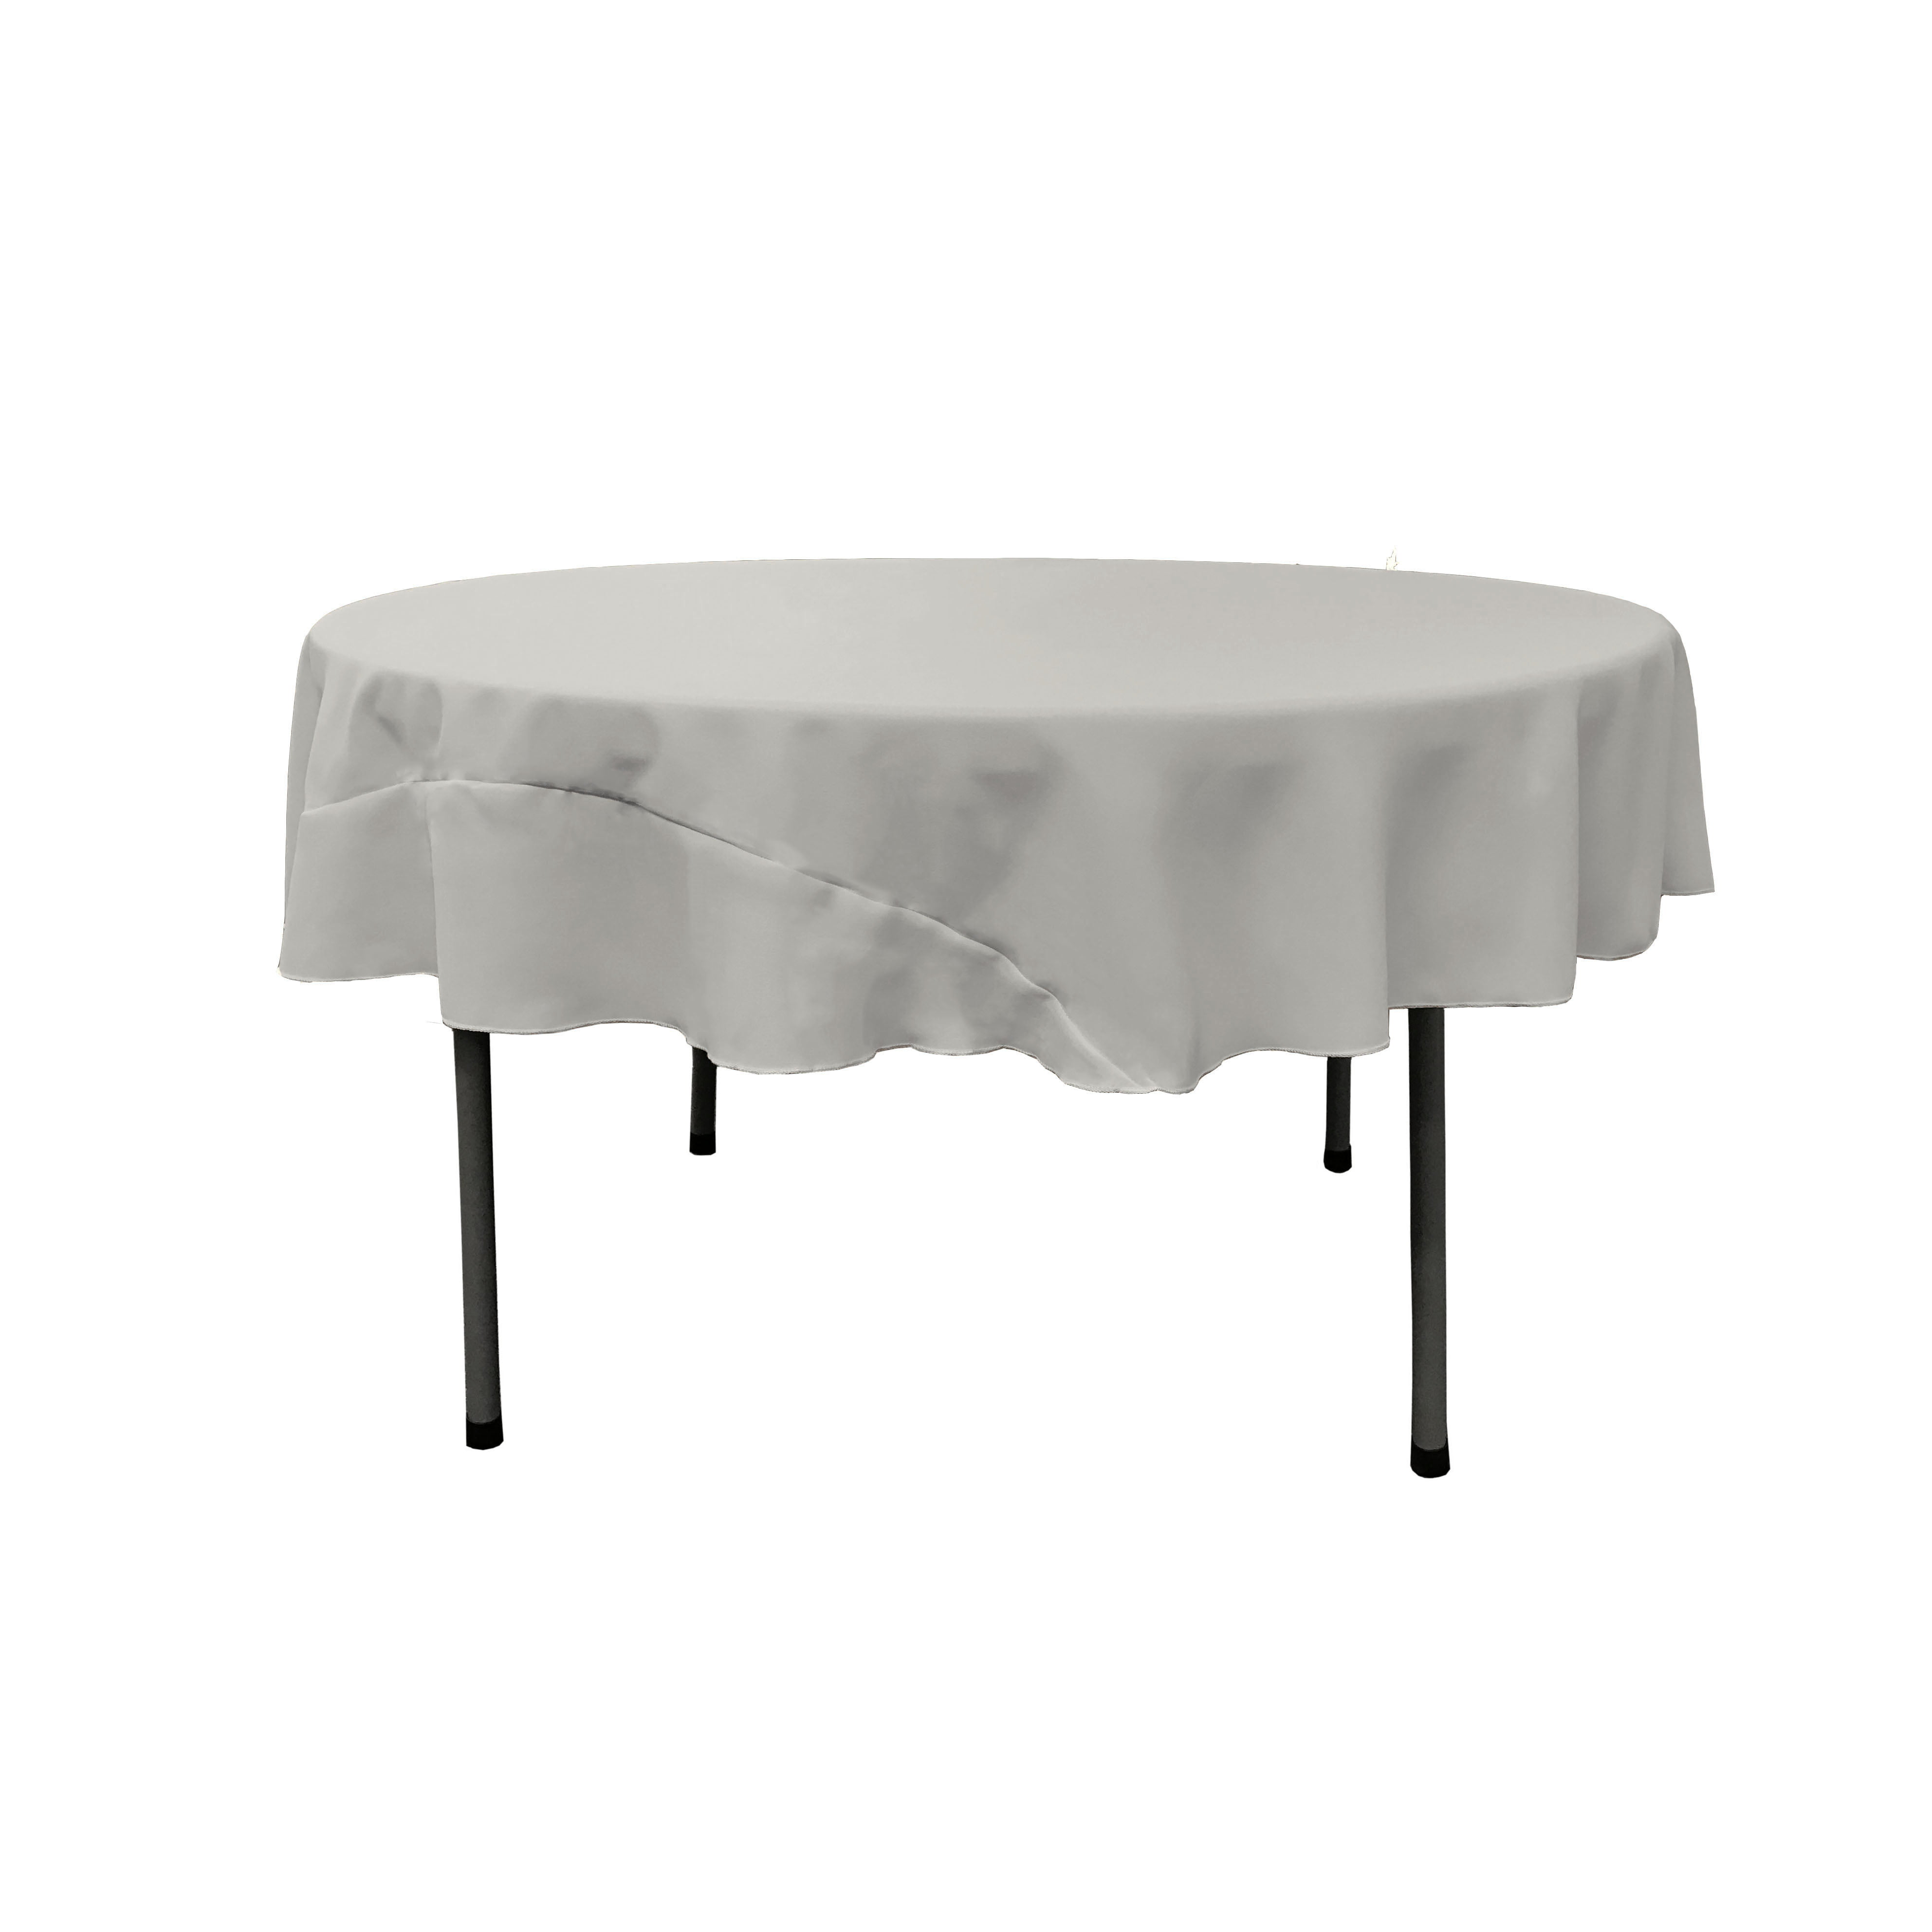 La Linen Polyester Poplin Tablecloth 72, 72 Inch Round Table Pad